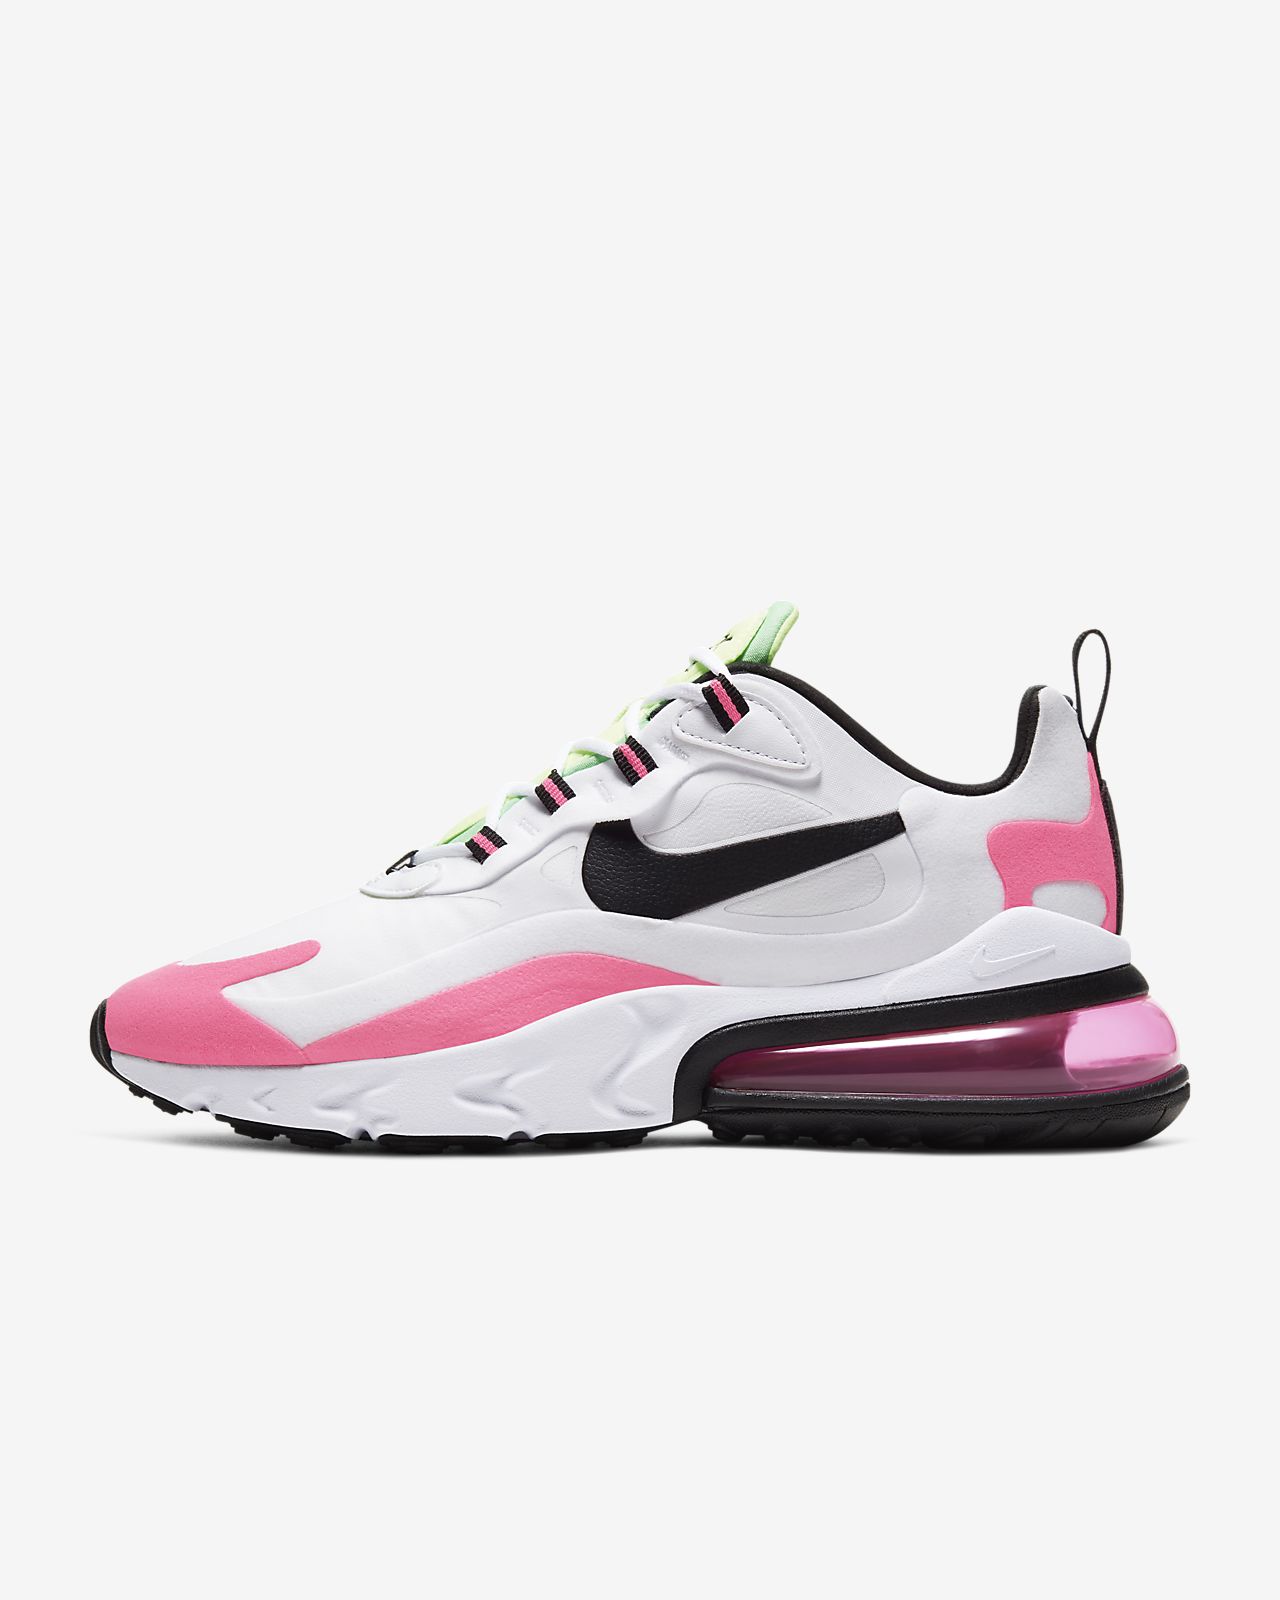 Men's Shoes NIKE AIR MAX 90 DUST ARCTIC PINK SAIL MENS RUNNING SHOES ...